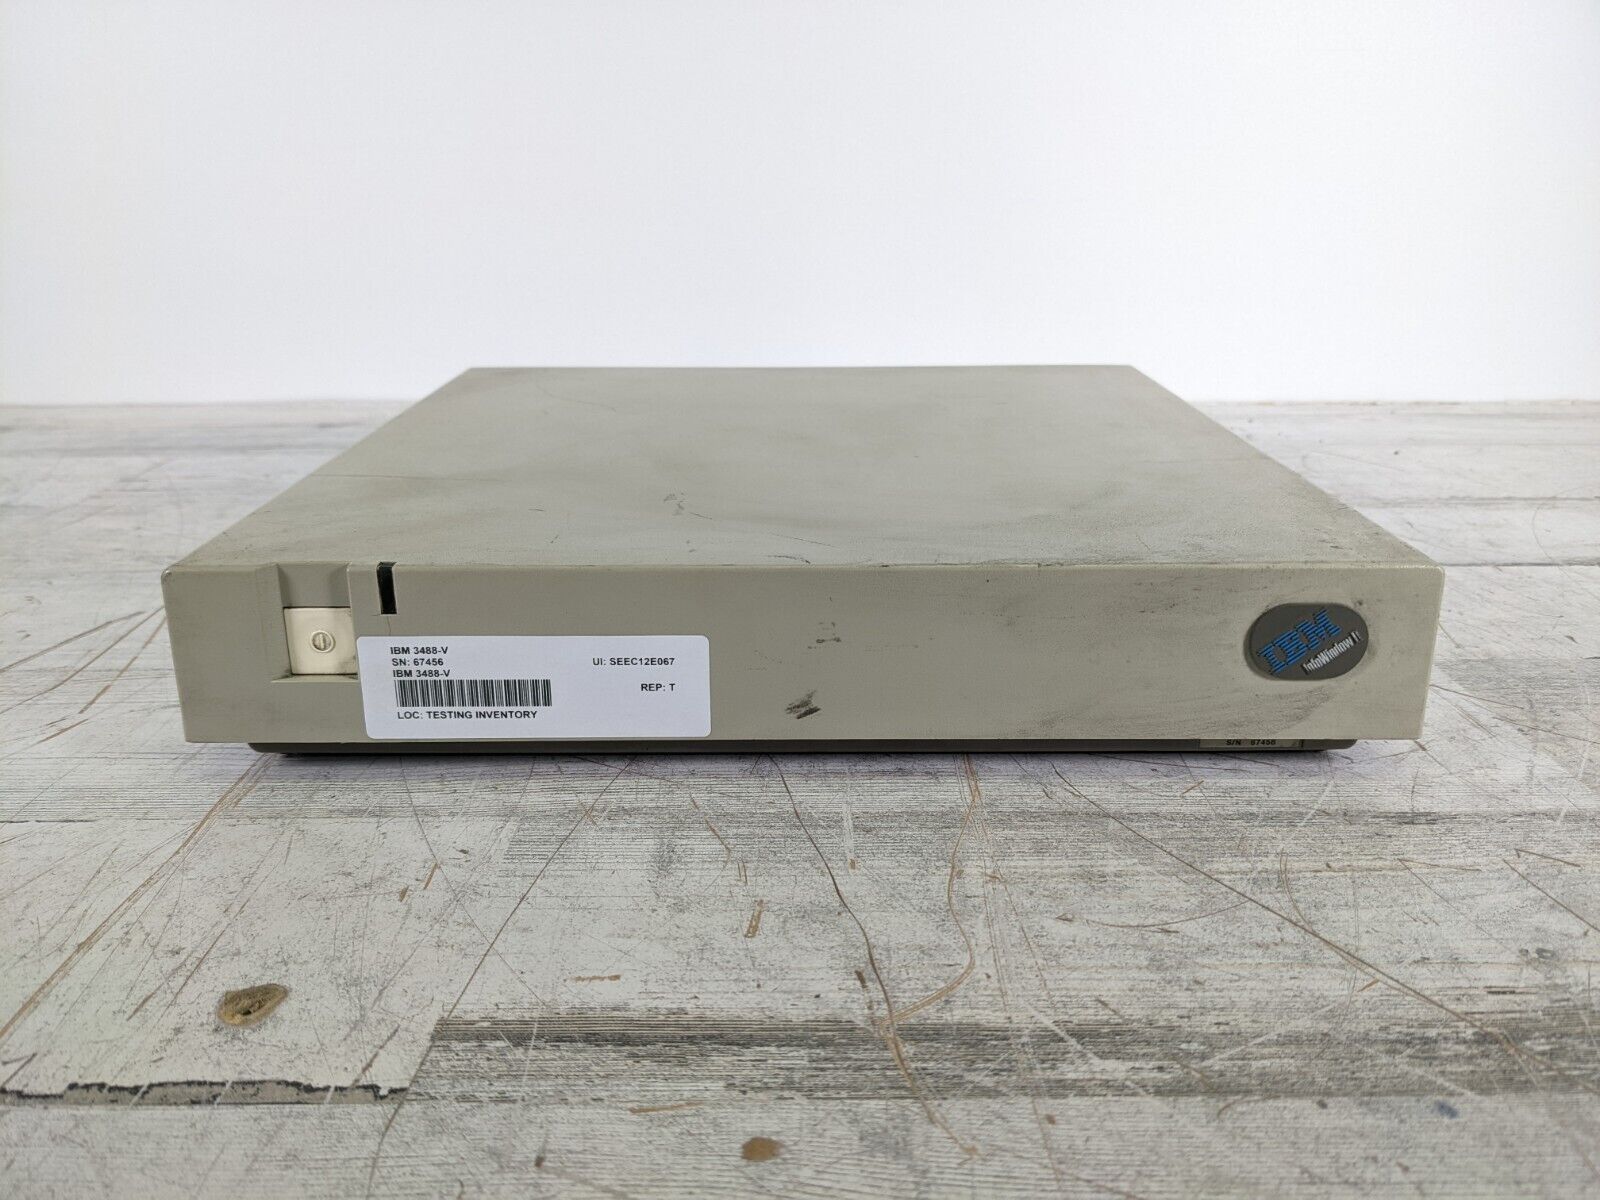 IBM INFOWINDOW II 3488-V TWINAX TERMINAL BASE - (POWER TESTED ONLY)